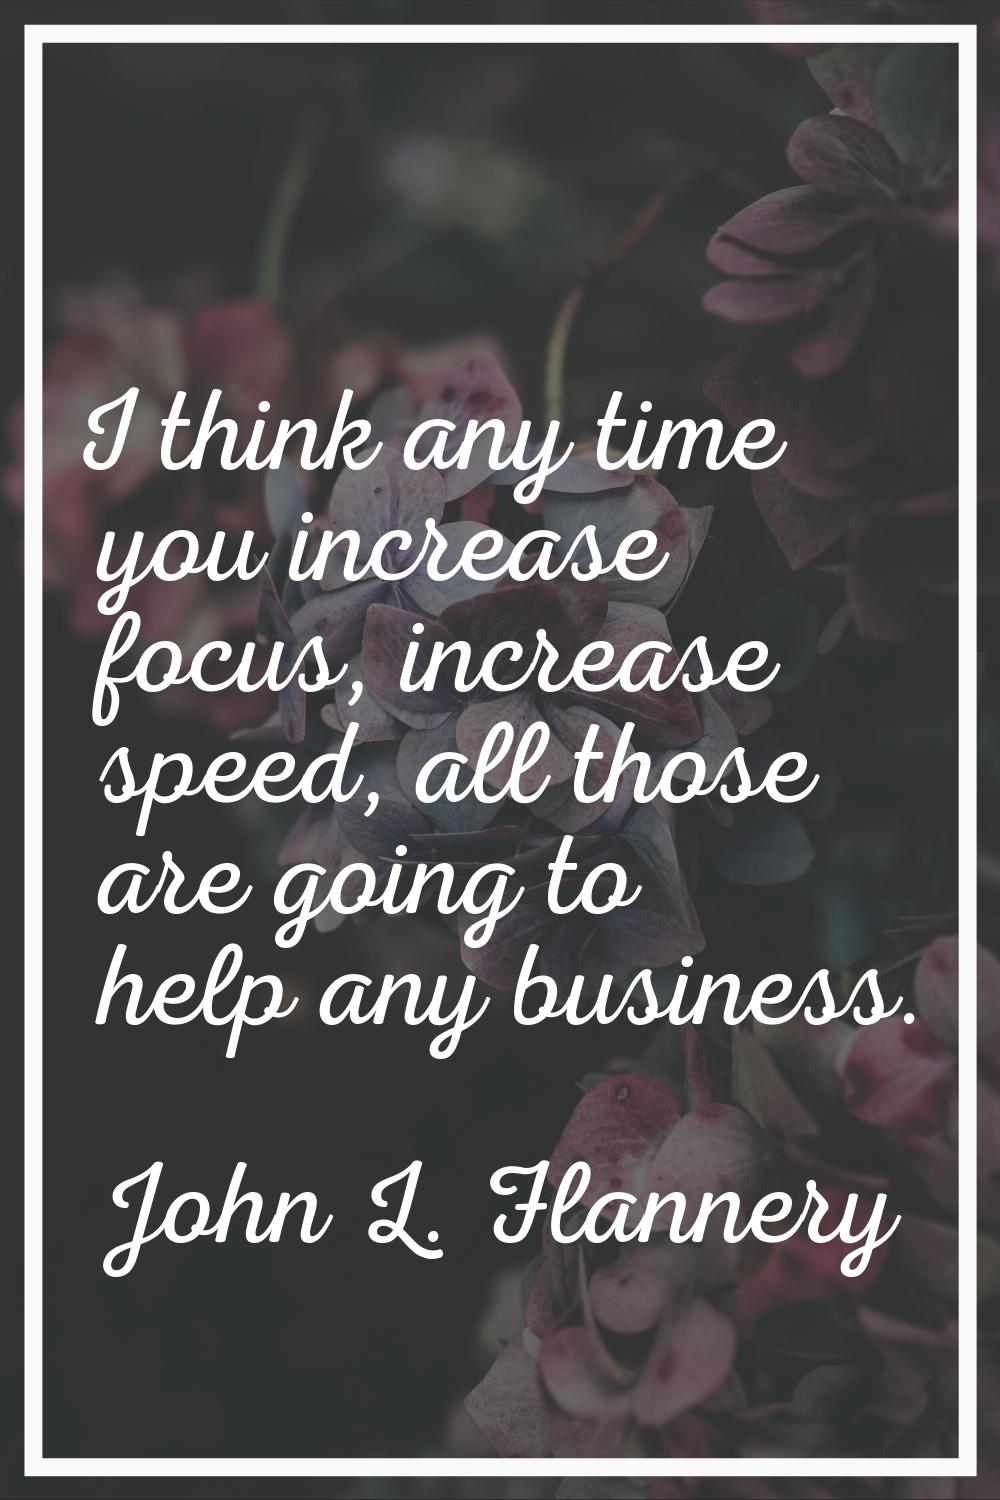 I think any time you increase focus, increase speed, all those are going to help any business.